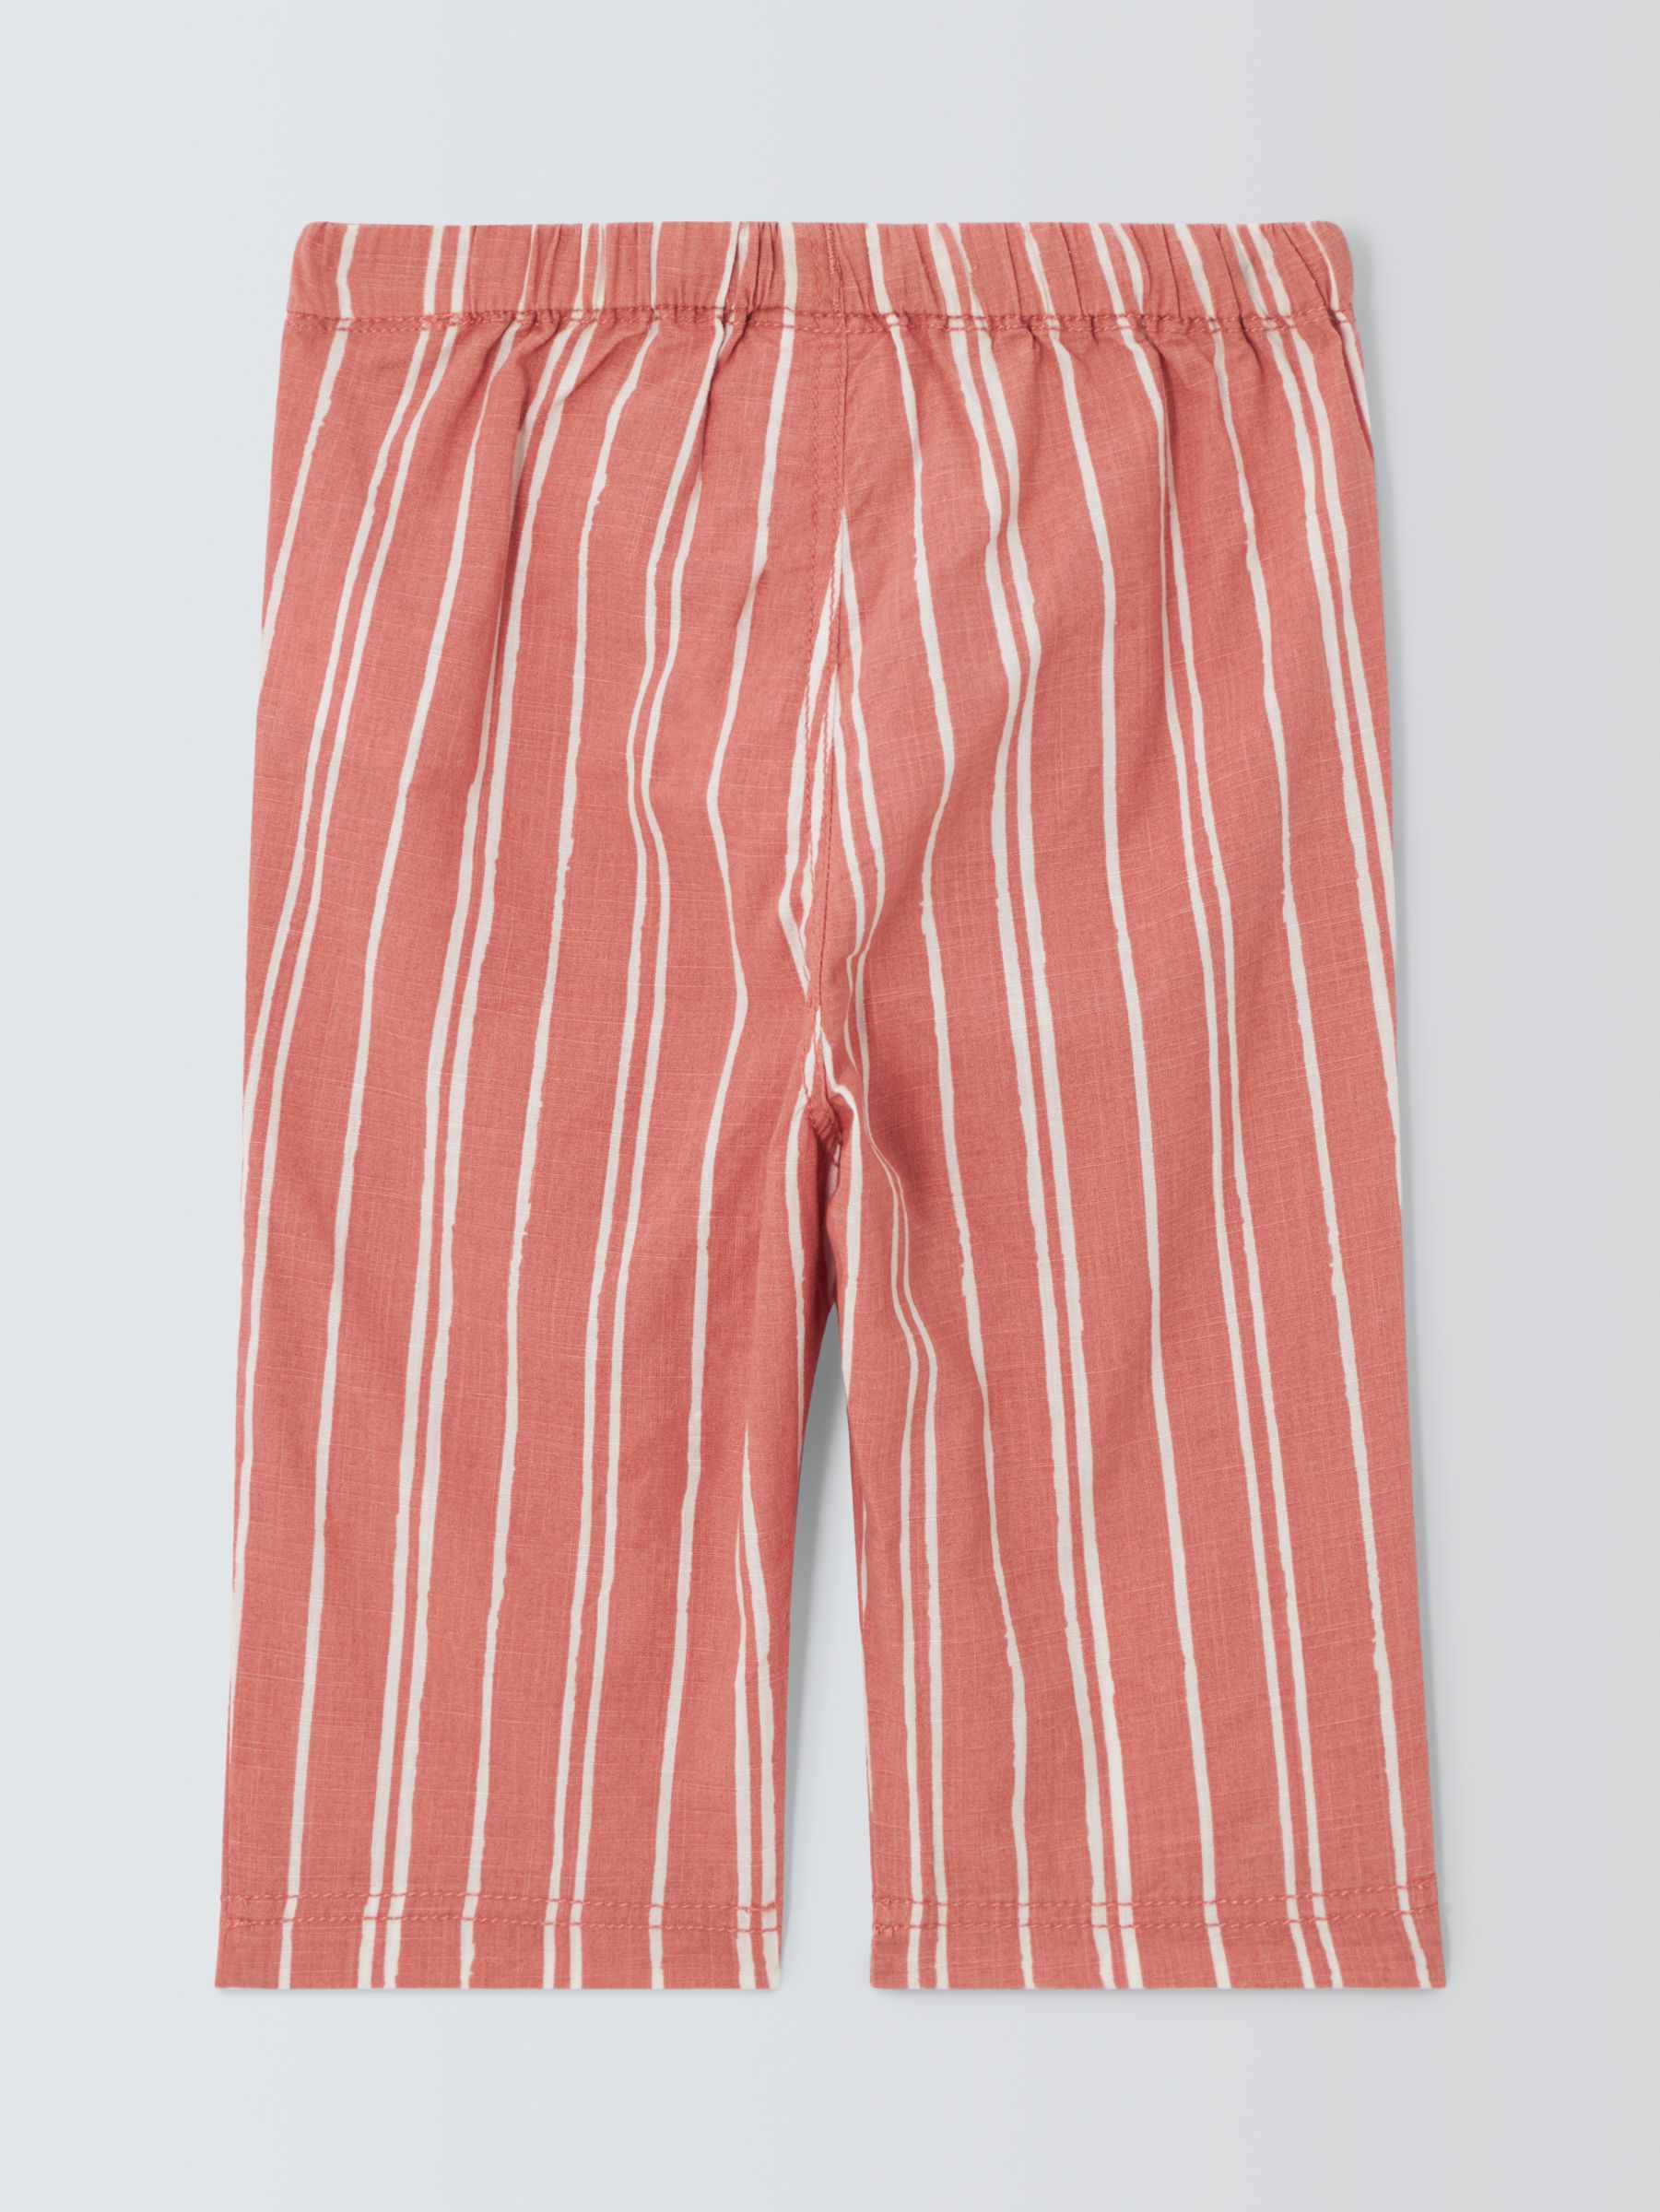 John Lewis Baby Stripe Trousers, Red/White, 6-9 months